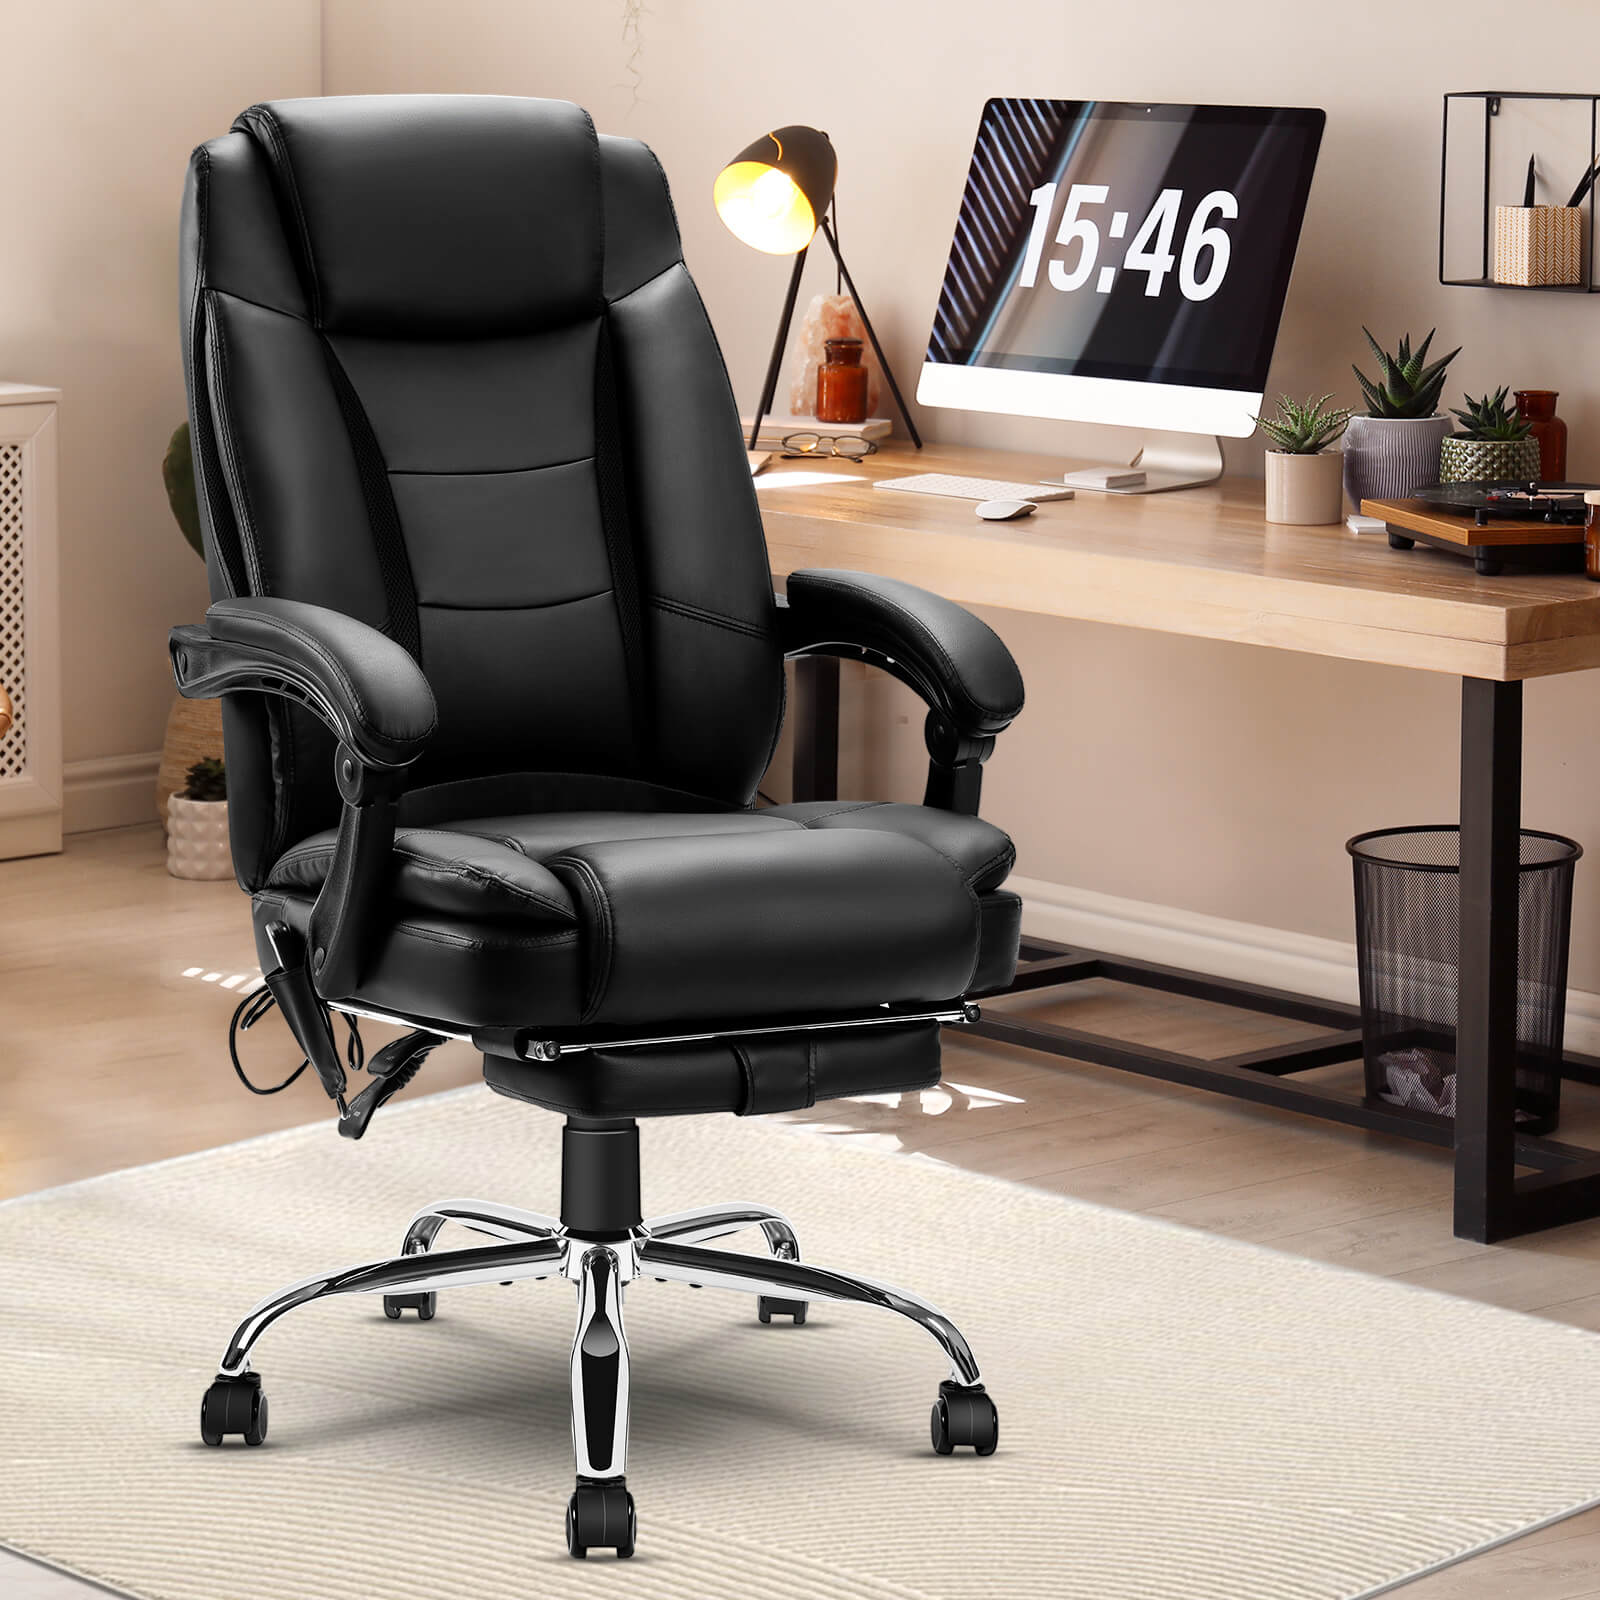 Big and Tall Massage Office Chair Wide Seat Ergonomic Desk Chair